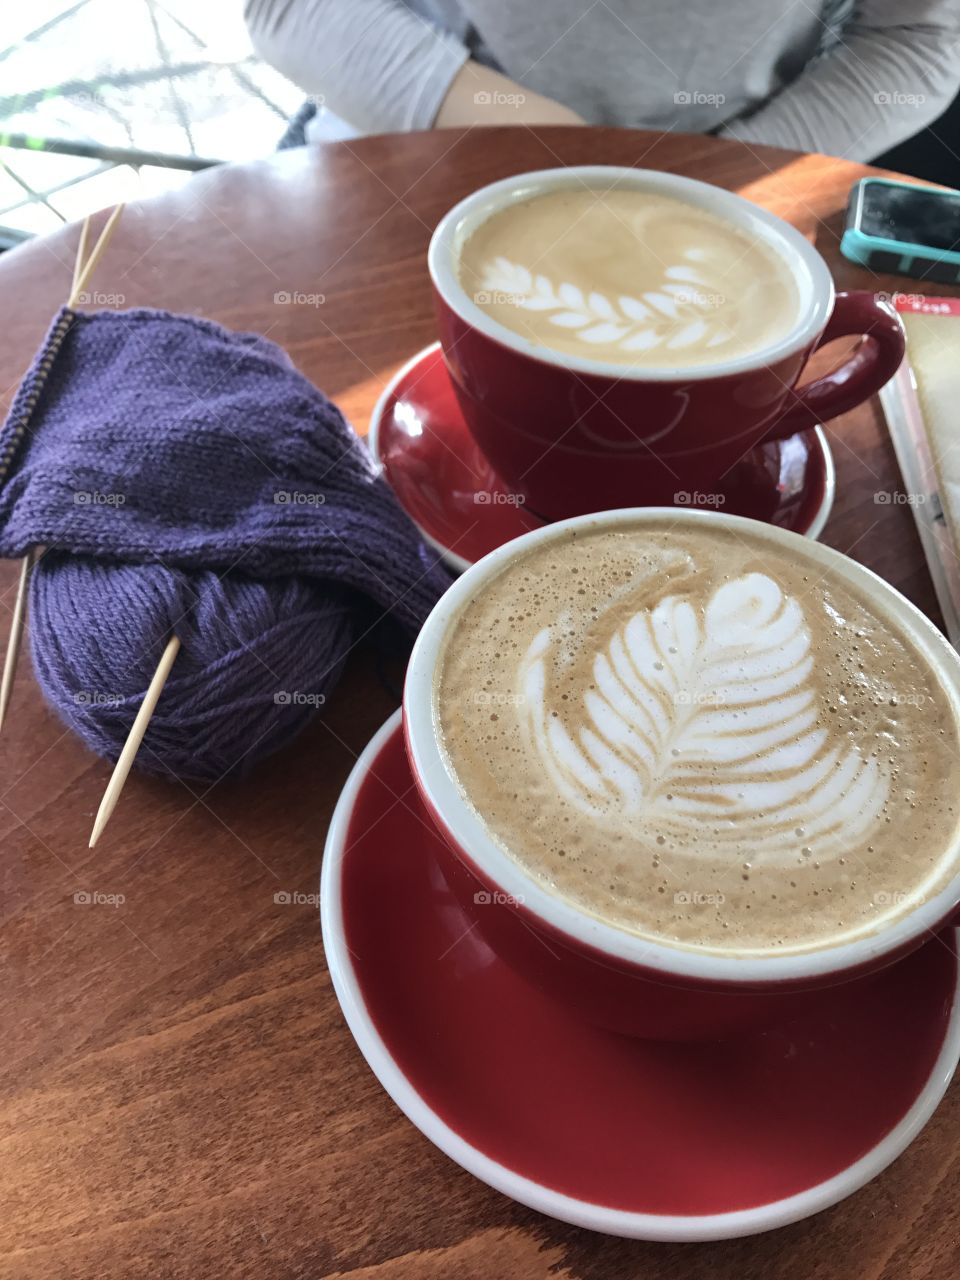 Coffee and Knitting